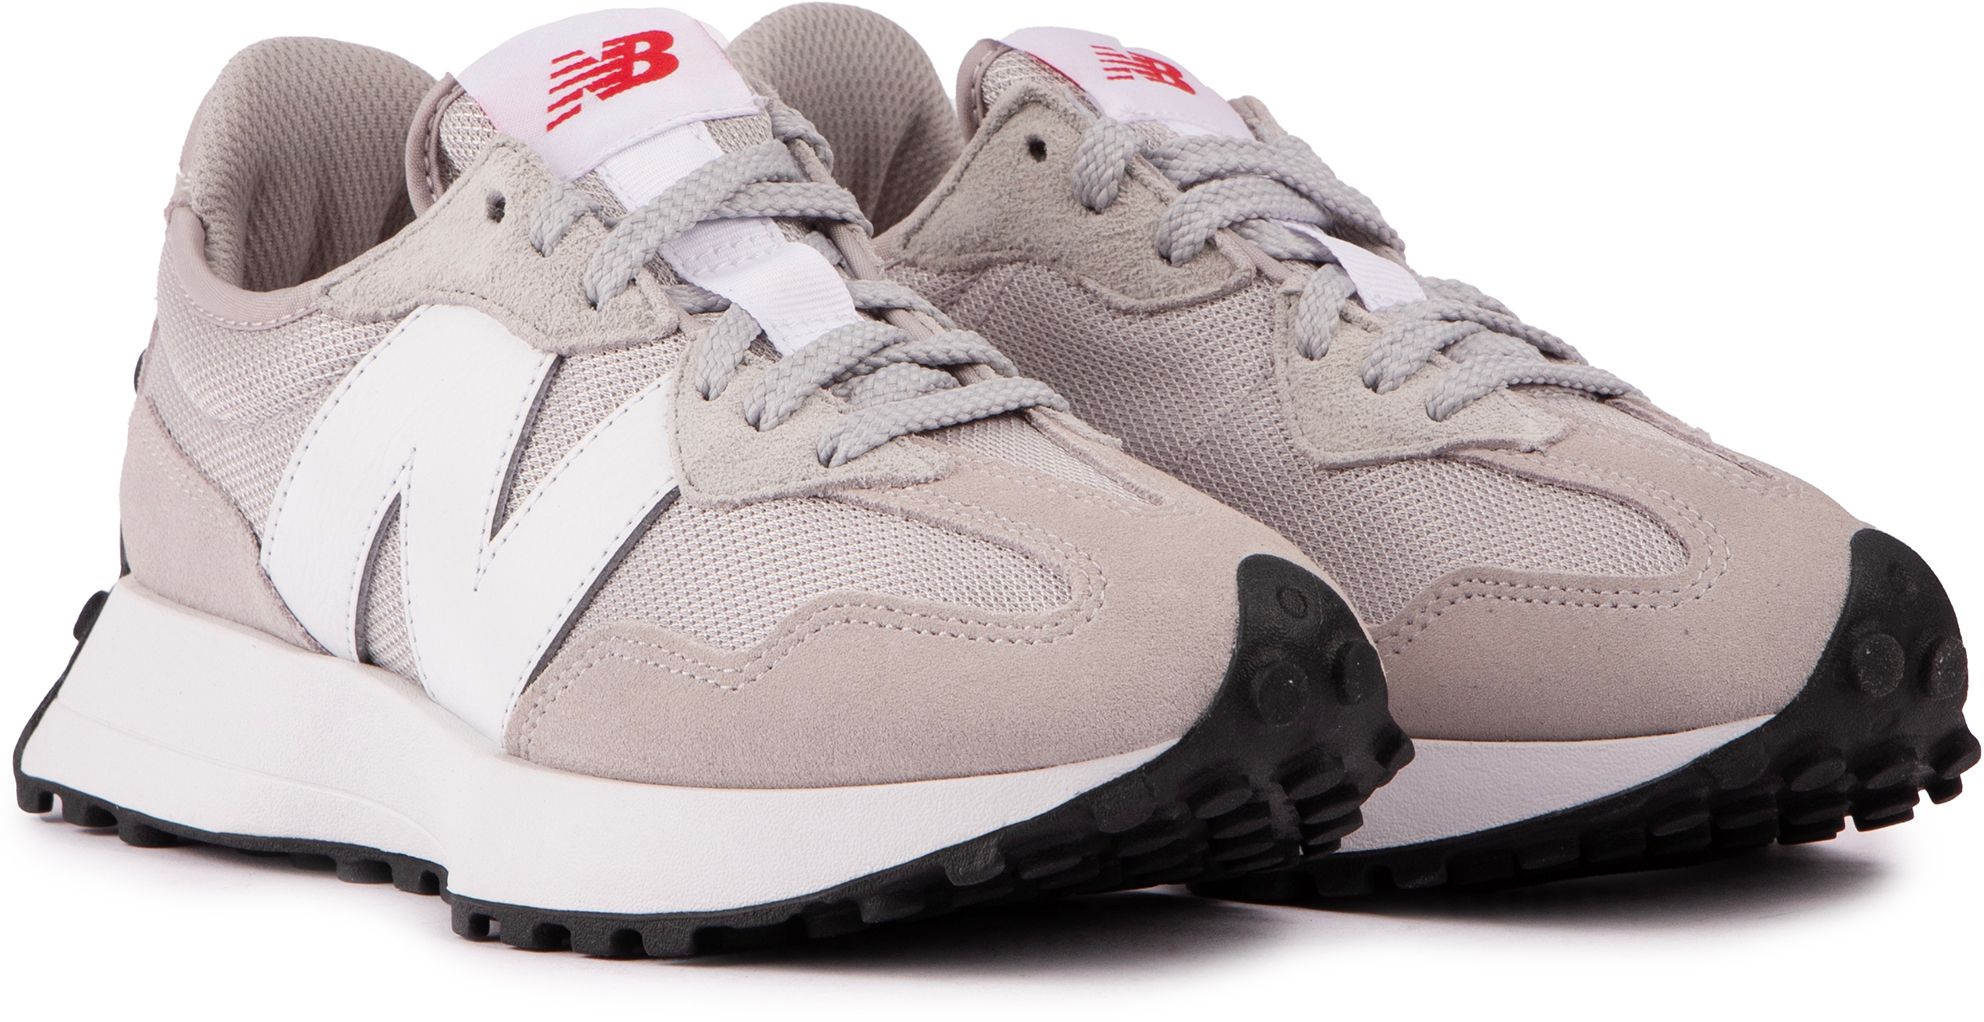 Womens New Balance 327 Sneakers In Grey/White | Soletrader